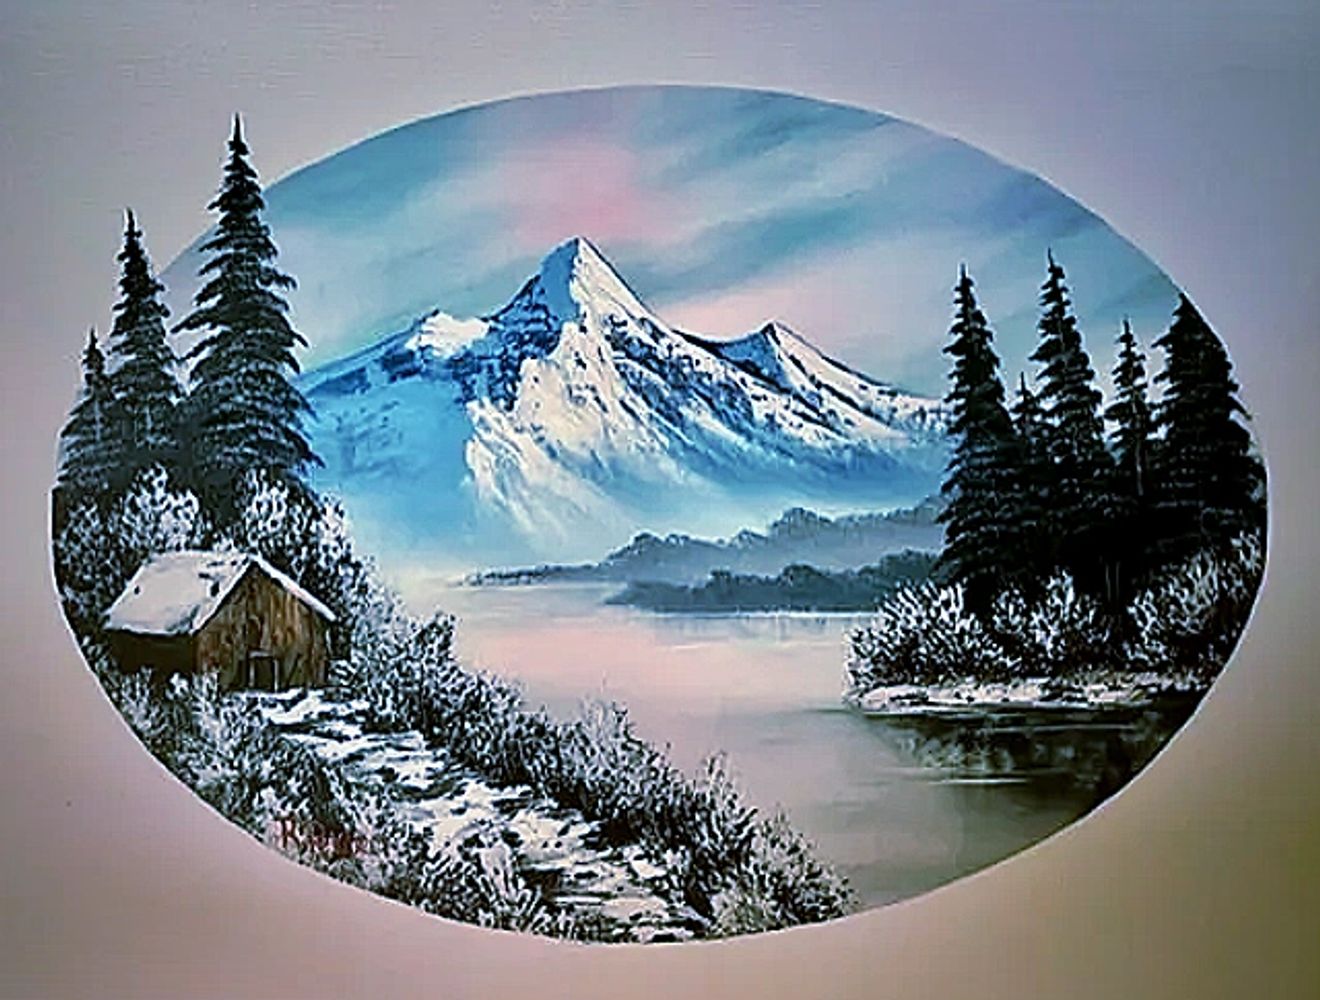 This painting was my Bob Ross Certification exam. I had to demonstrate and paint this in 30 minutes.